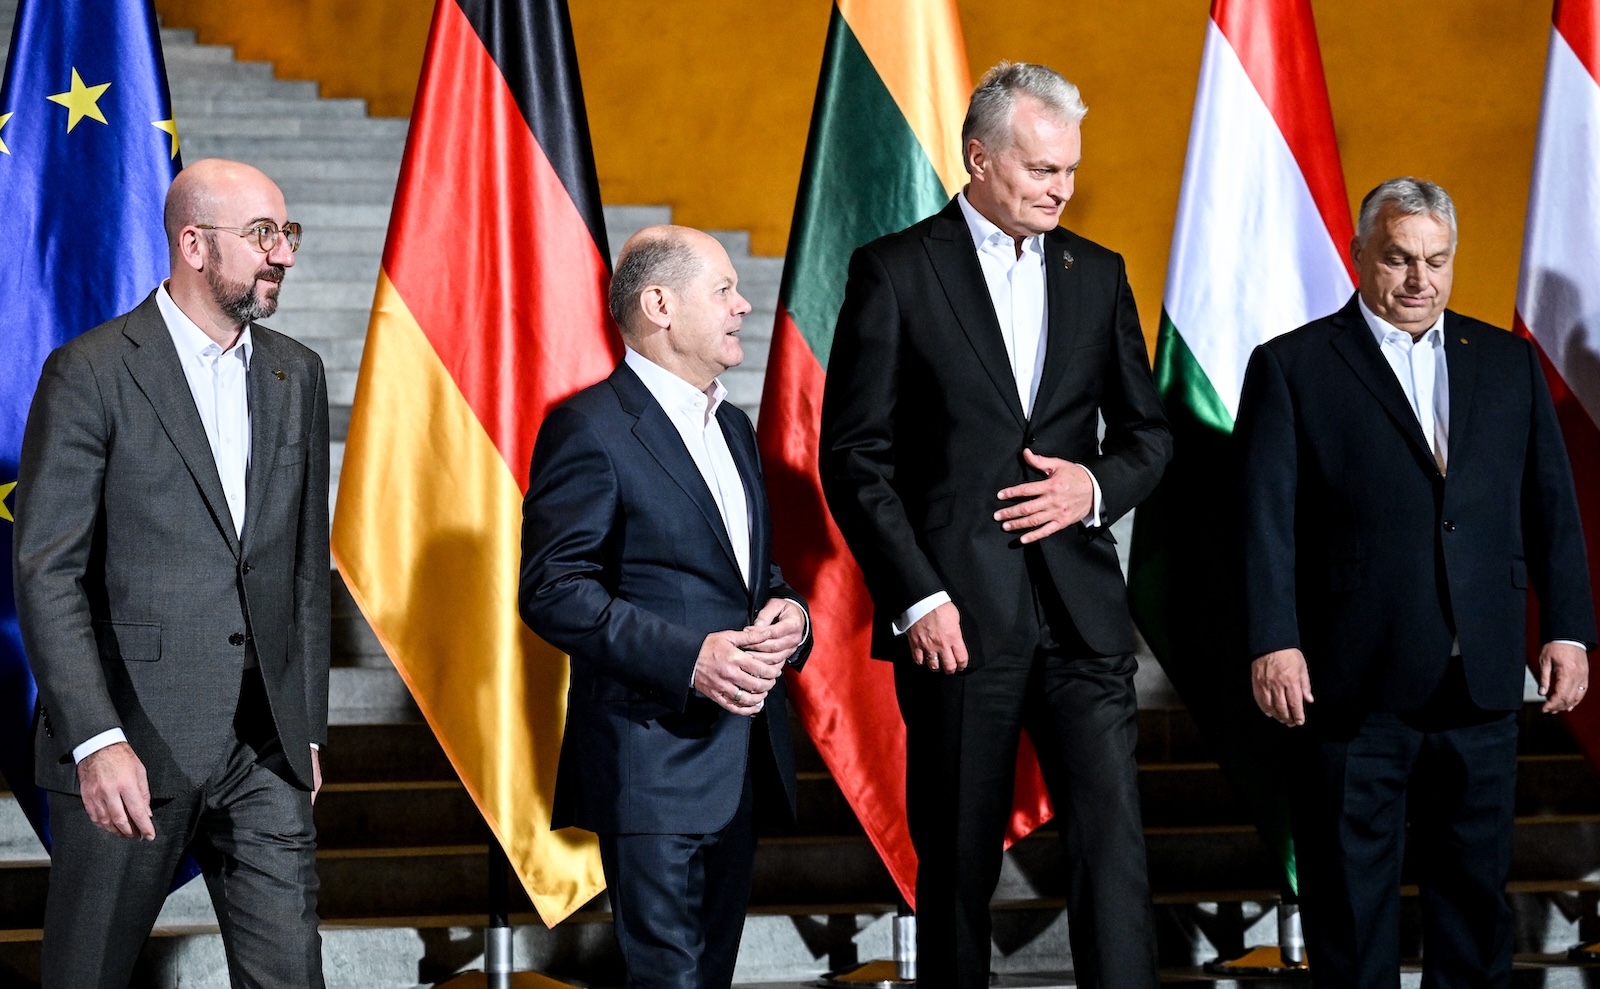 epa10973692 (L-R) European  Council President Charles Michel, German Chancellor Olaf Scholz and Lithuania's President Gitanas Nauseda, and Hungary's Prime Minister Viktor Orban talk after posing for a group photo at the chancellery in Berlin, Germany, 13 November 2023. German Chancellor Scholz received EU colleagues at the invitation of EU Council President Michel for a joint dinner to discuss reform measures related to the European Union's enlargement.  EPA/FILIP SINGER